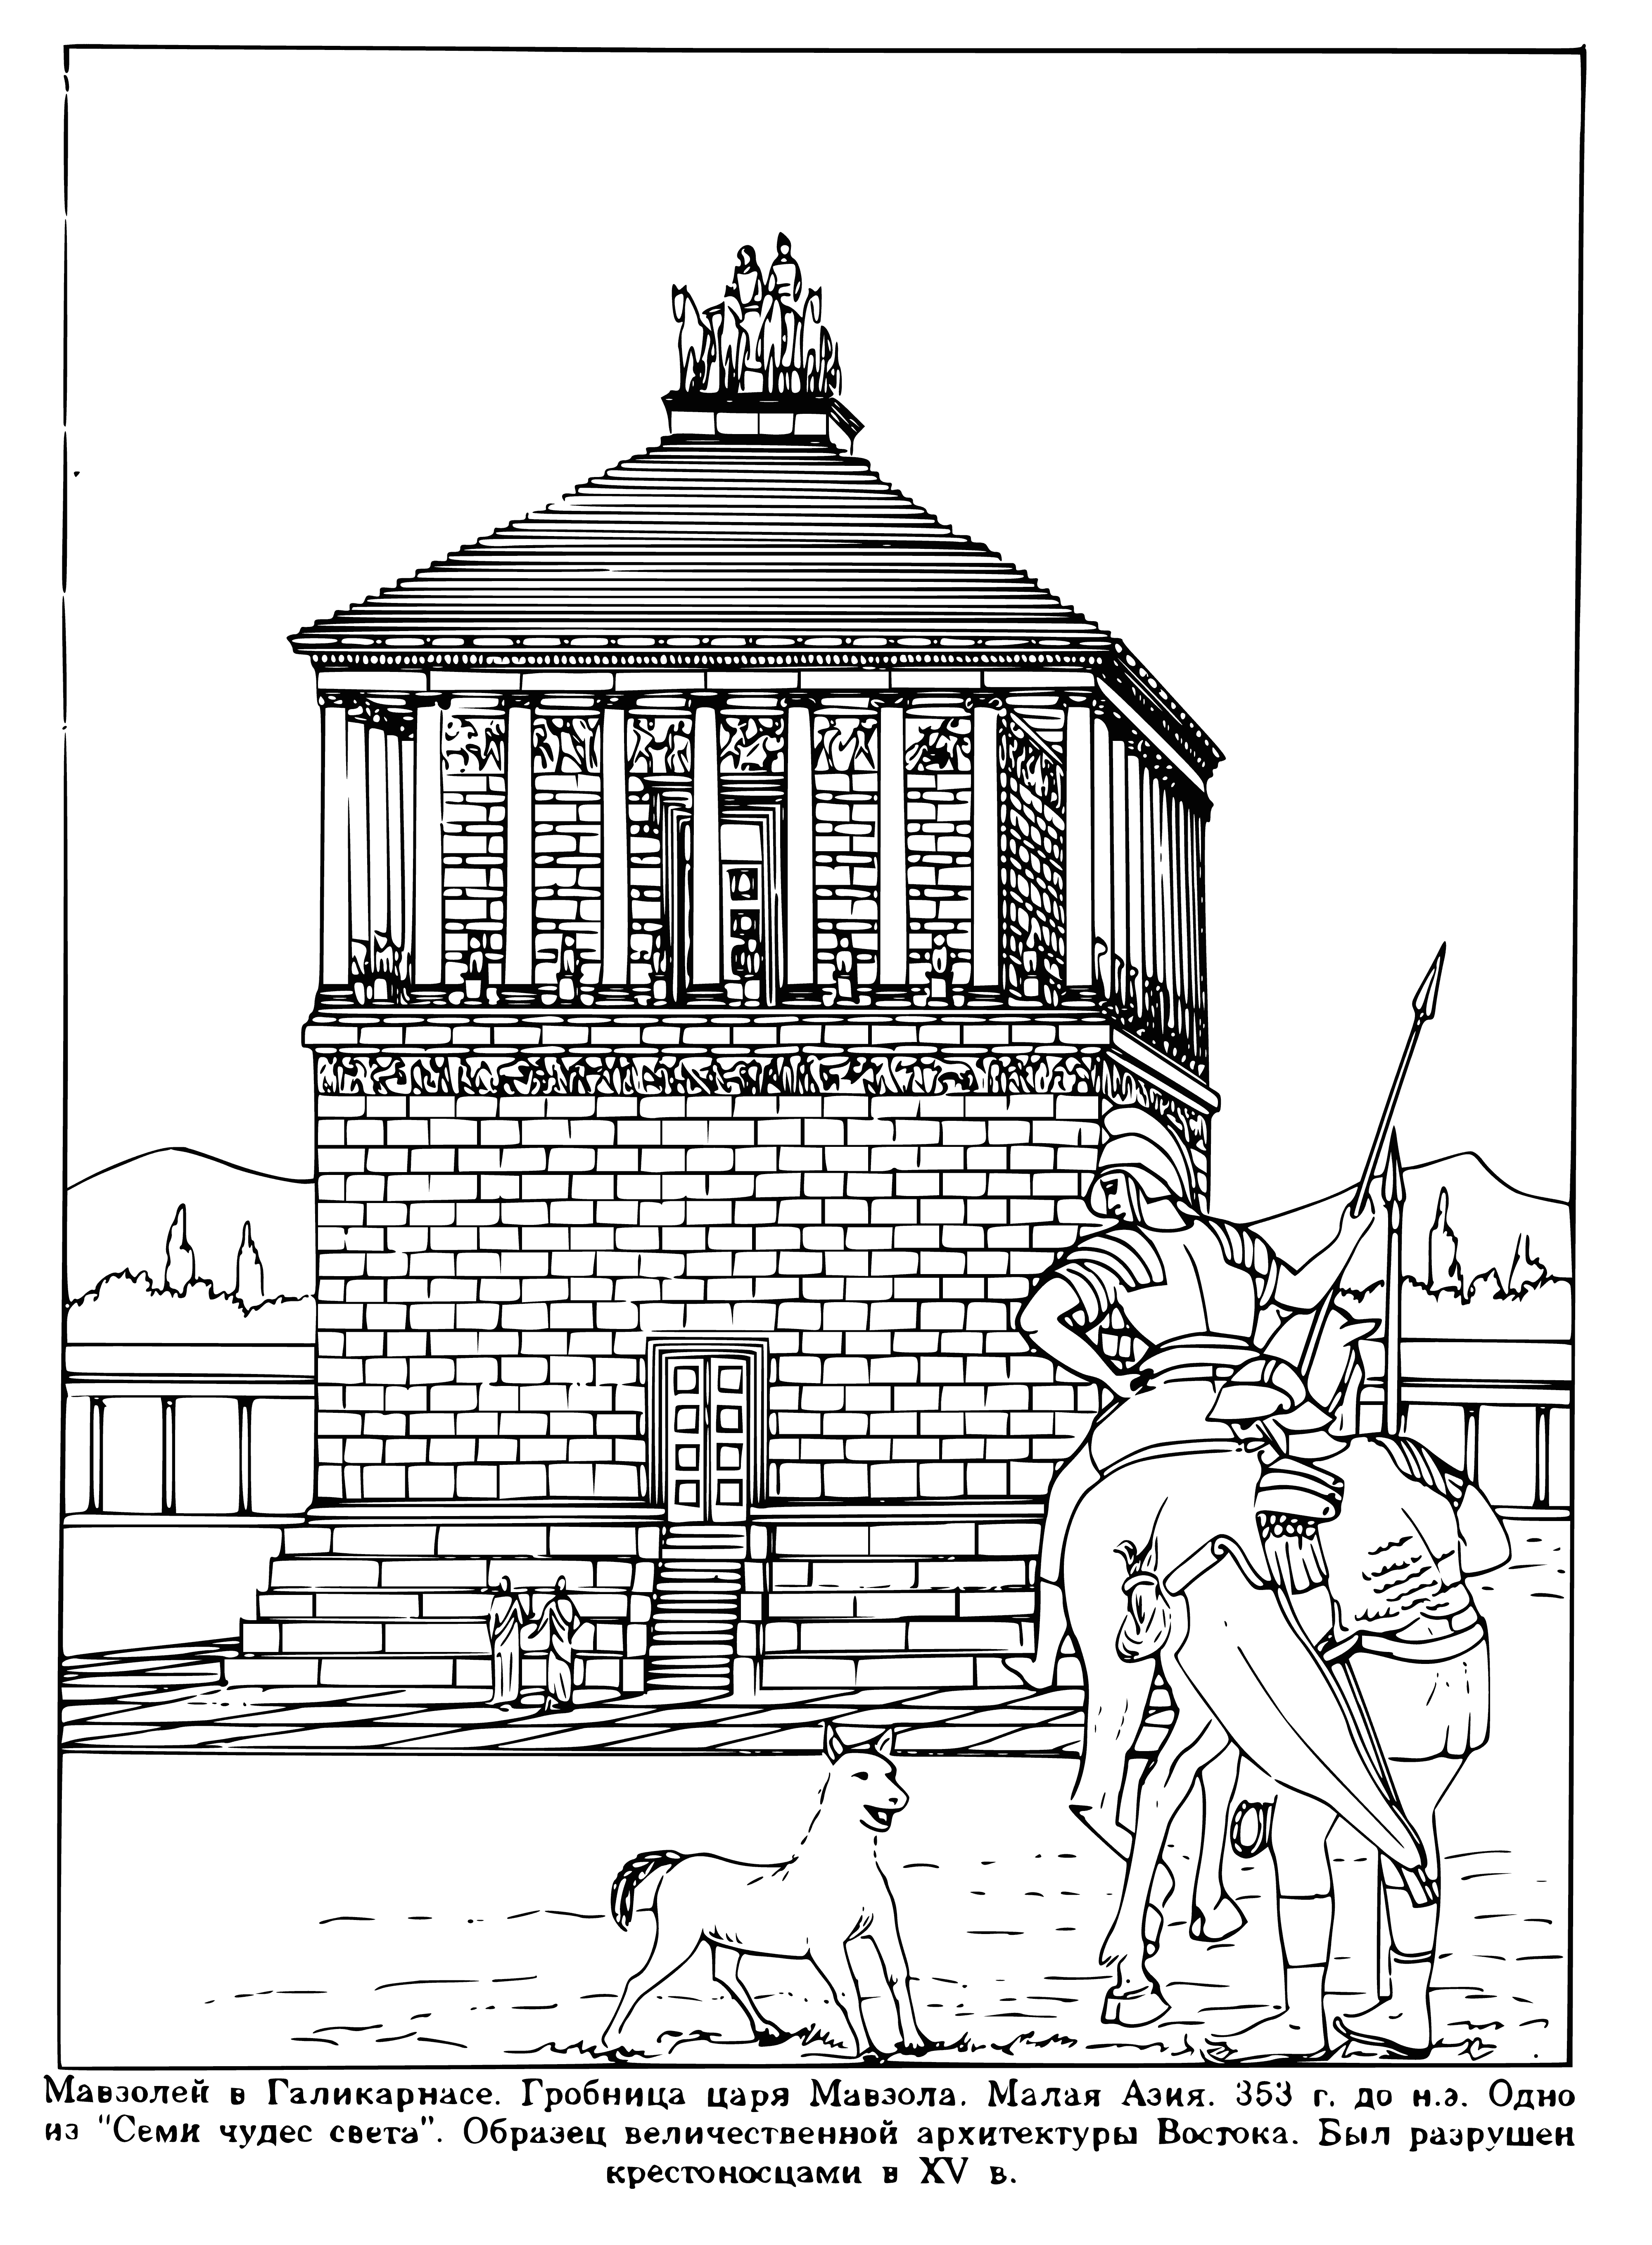 coloring page: The Halicarnassus Mausoleum was one of the Seven Wonders of the World, built 350 BCE by Queen Artemisia of Caria. It had a pyramidal roof & was decorated w/ reliefs & sculptures.